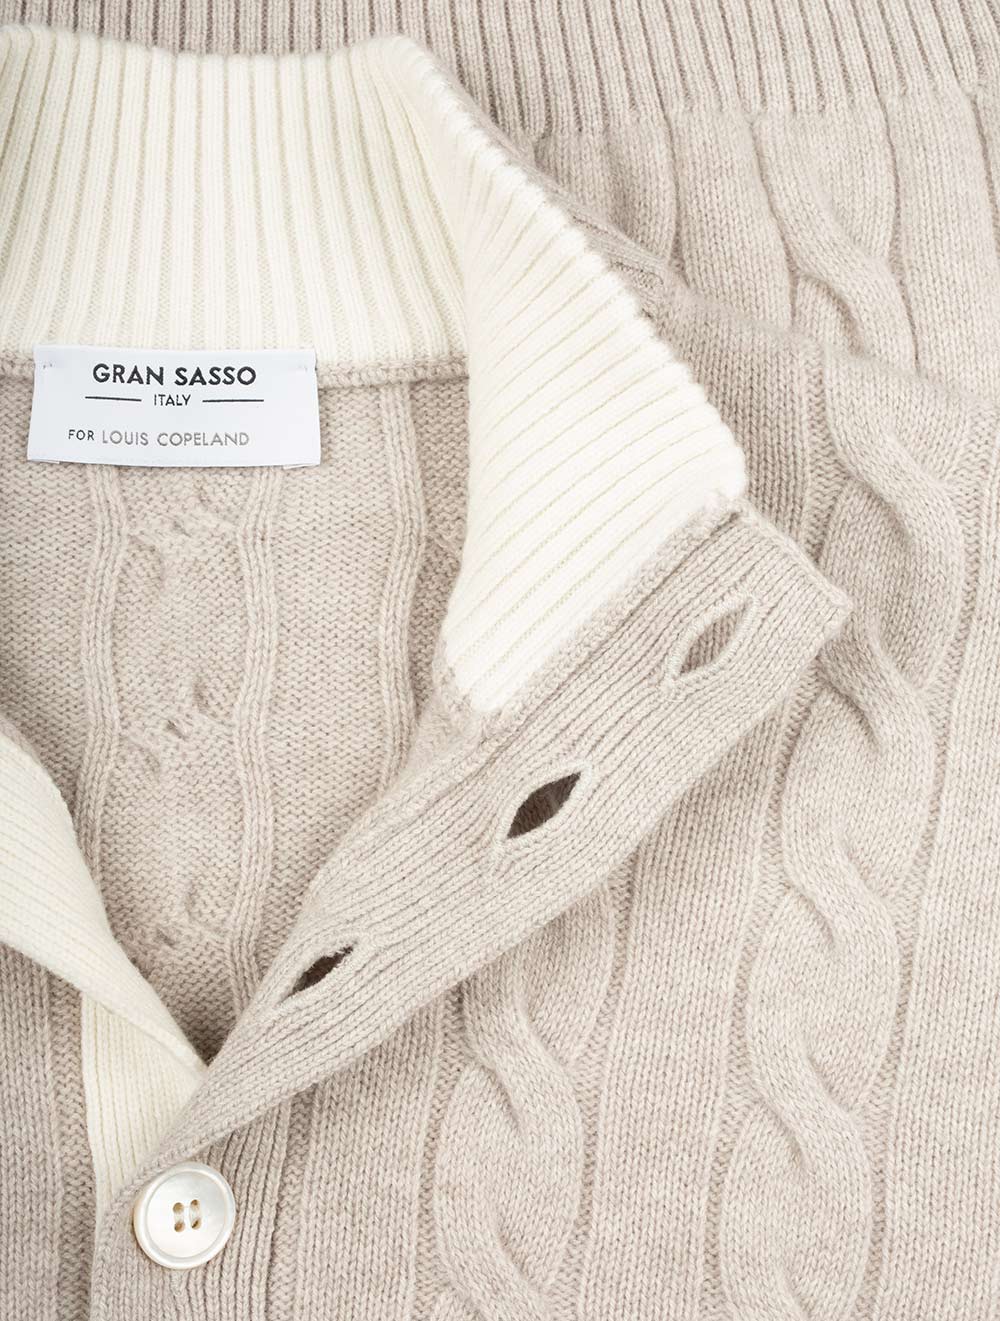 Mock Cable Knit Button Up Stone